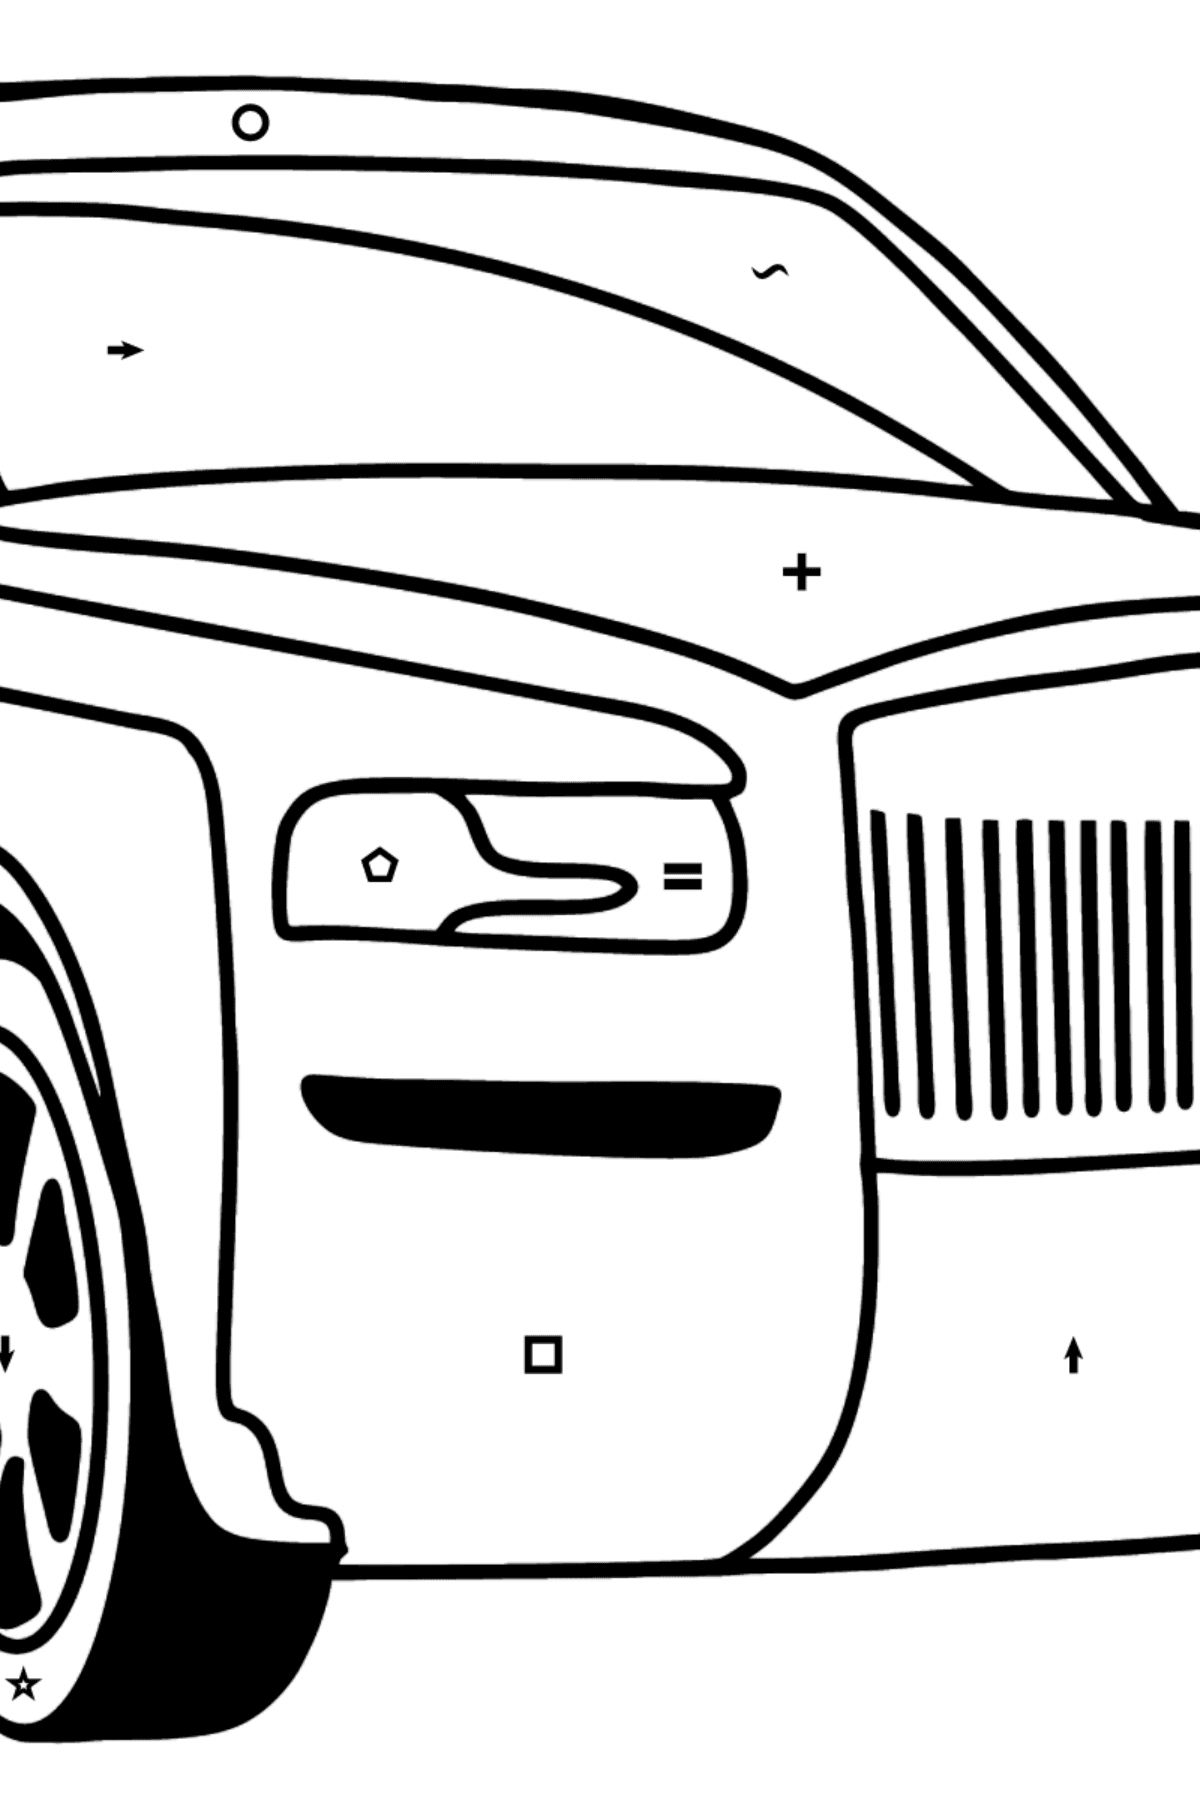 Rolls Royce Cullinan Car coloring page - Coloring by Symbols and Geometric Shapes for Kids